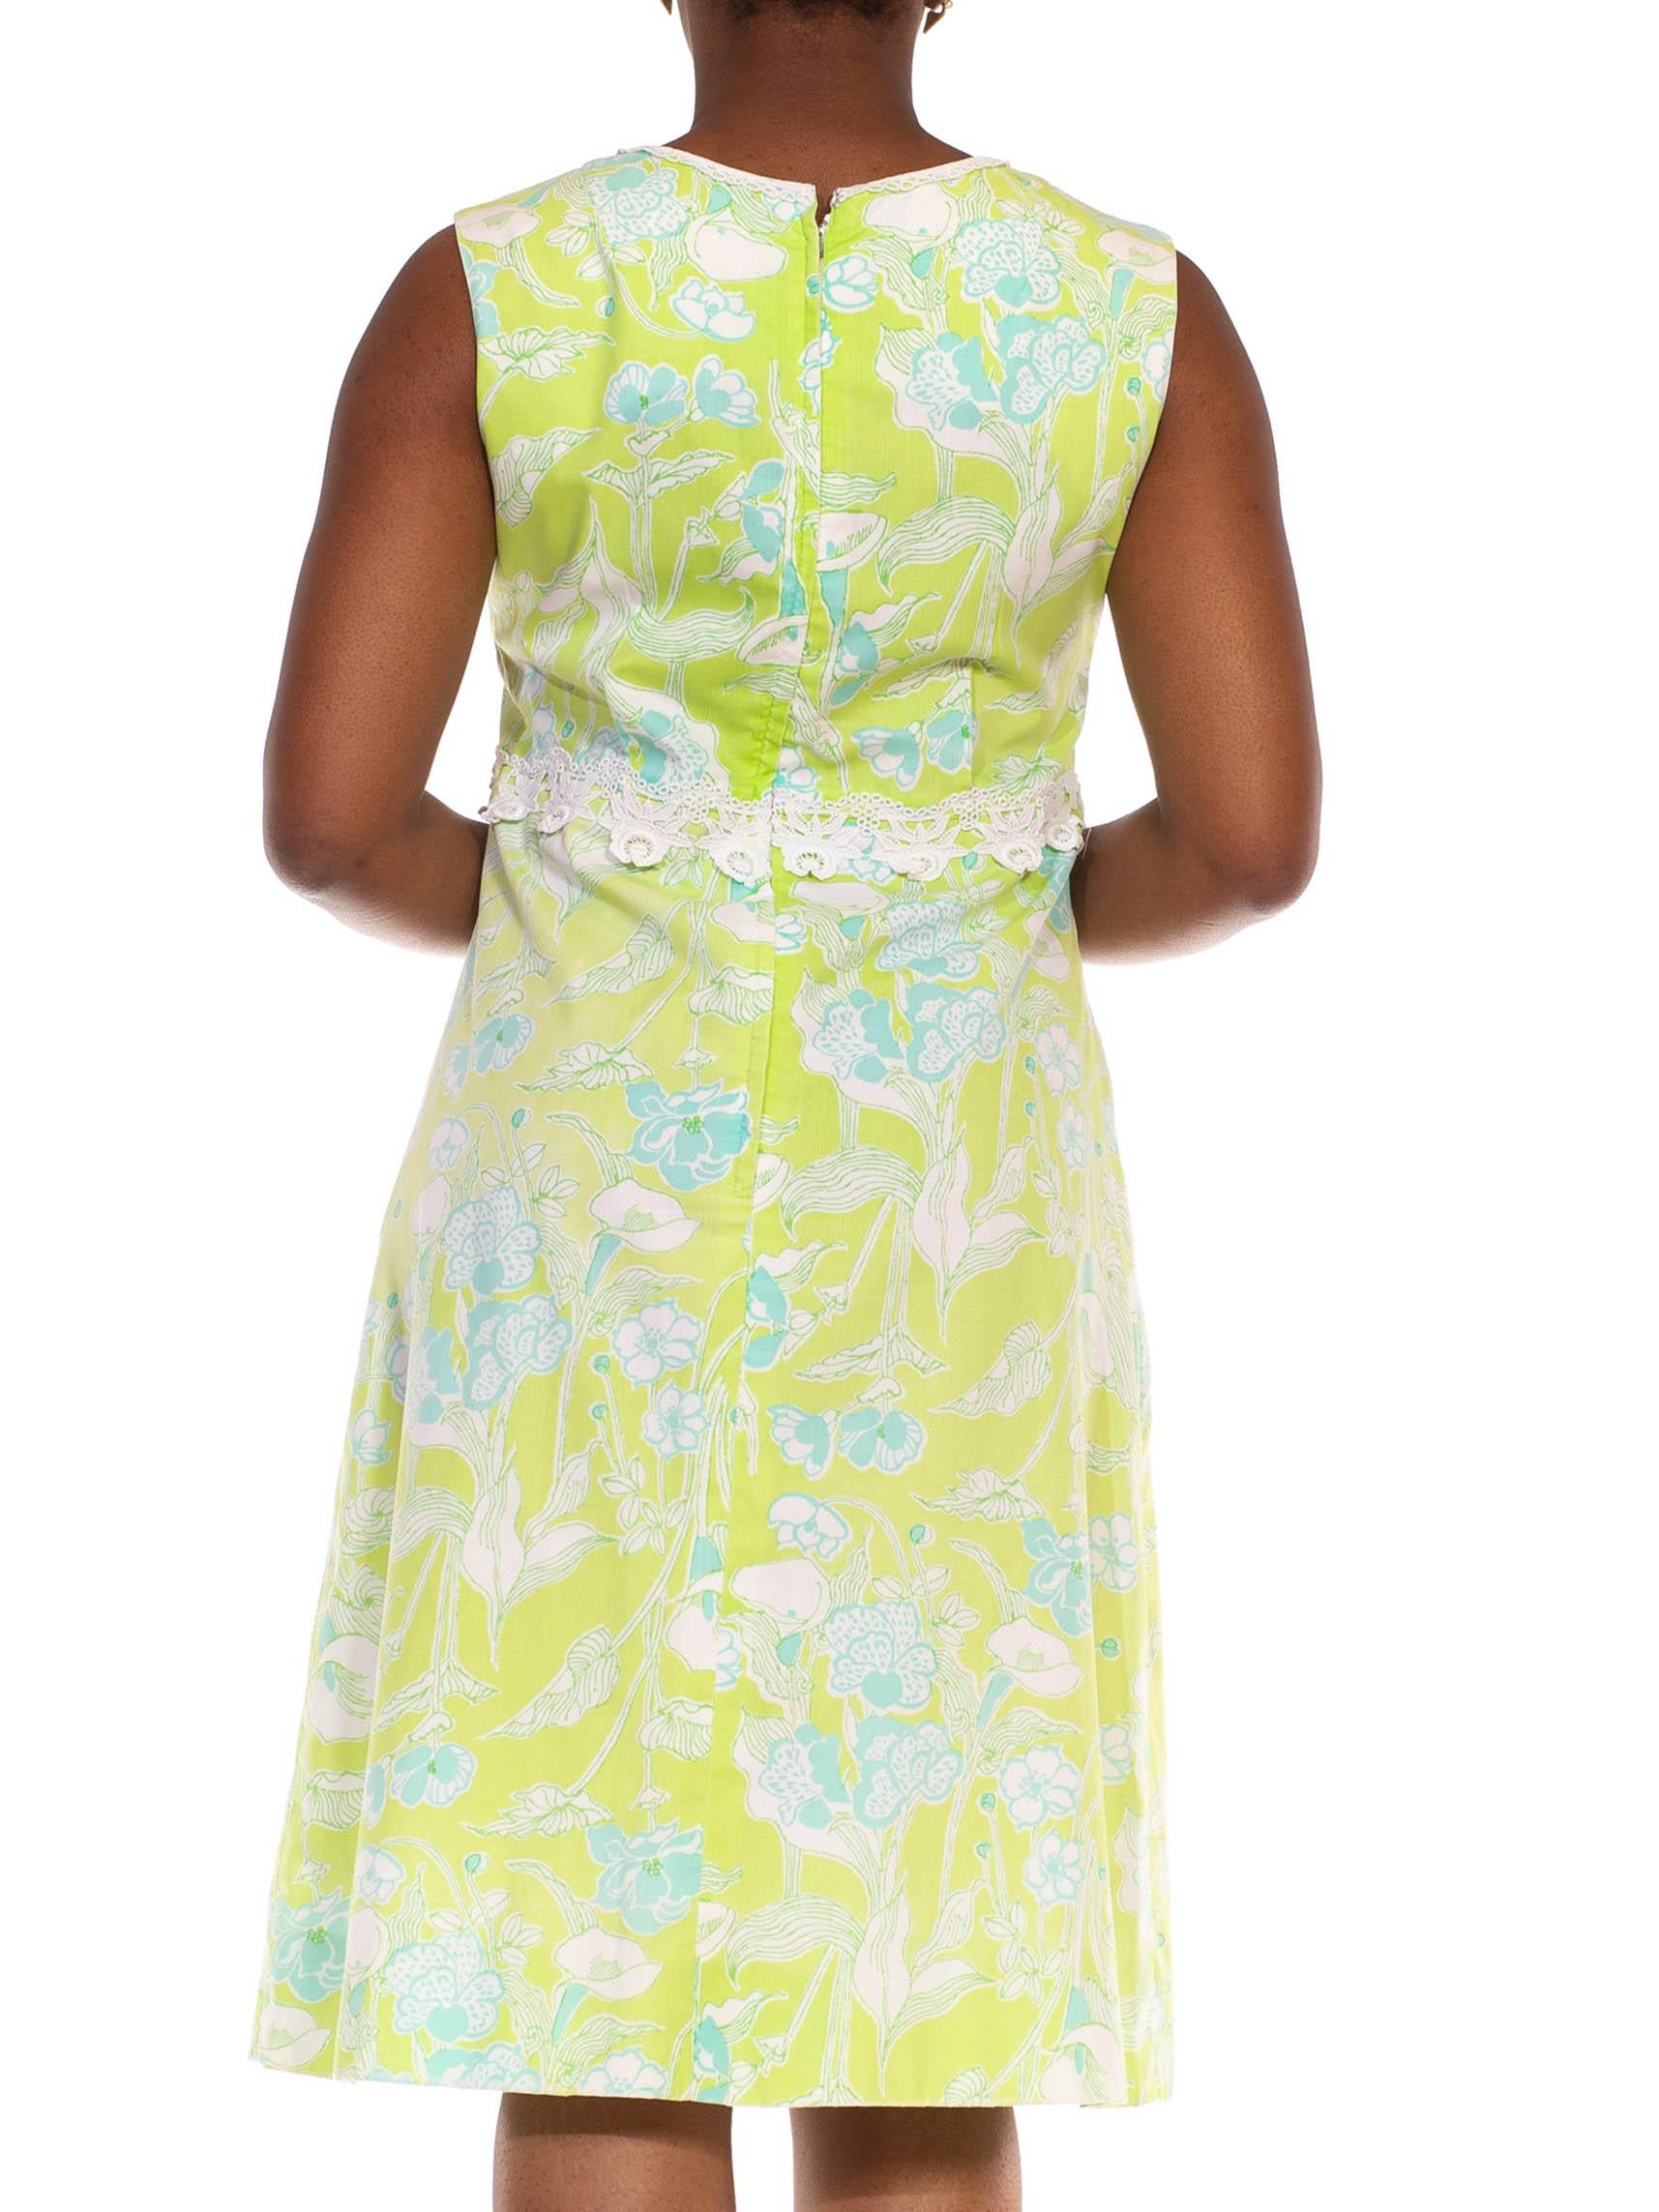 1960S LILLY PULITZER Light Green & Blue Cotton Sleeveless Floral Dress With Lace For Sale 1